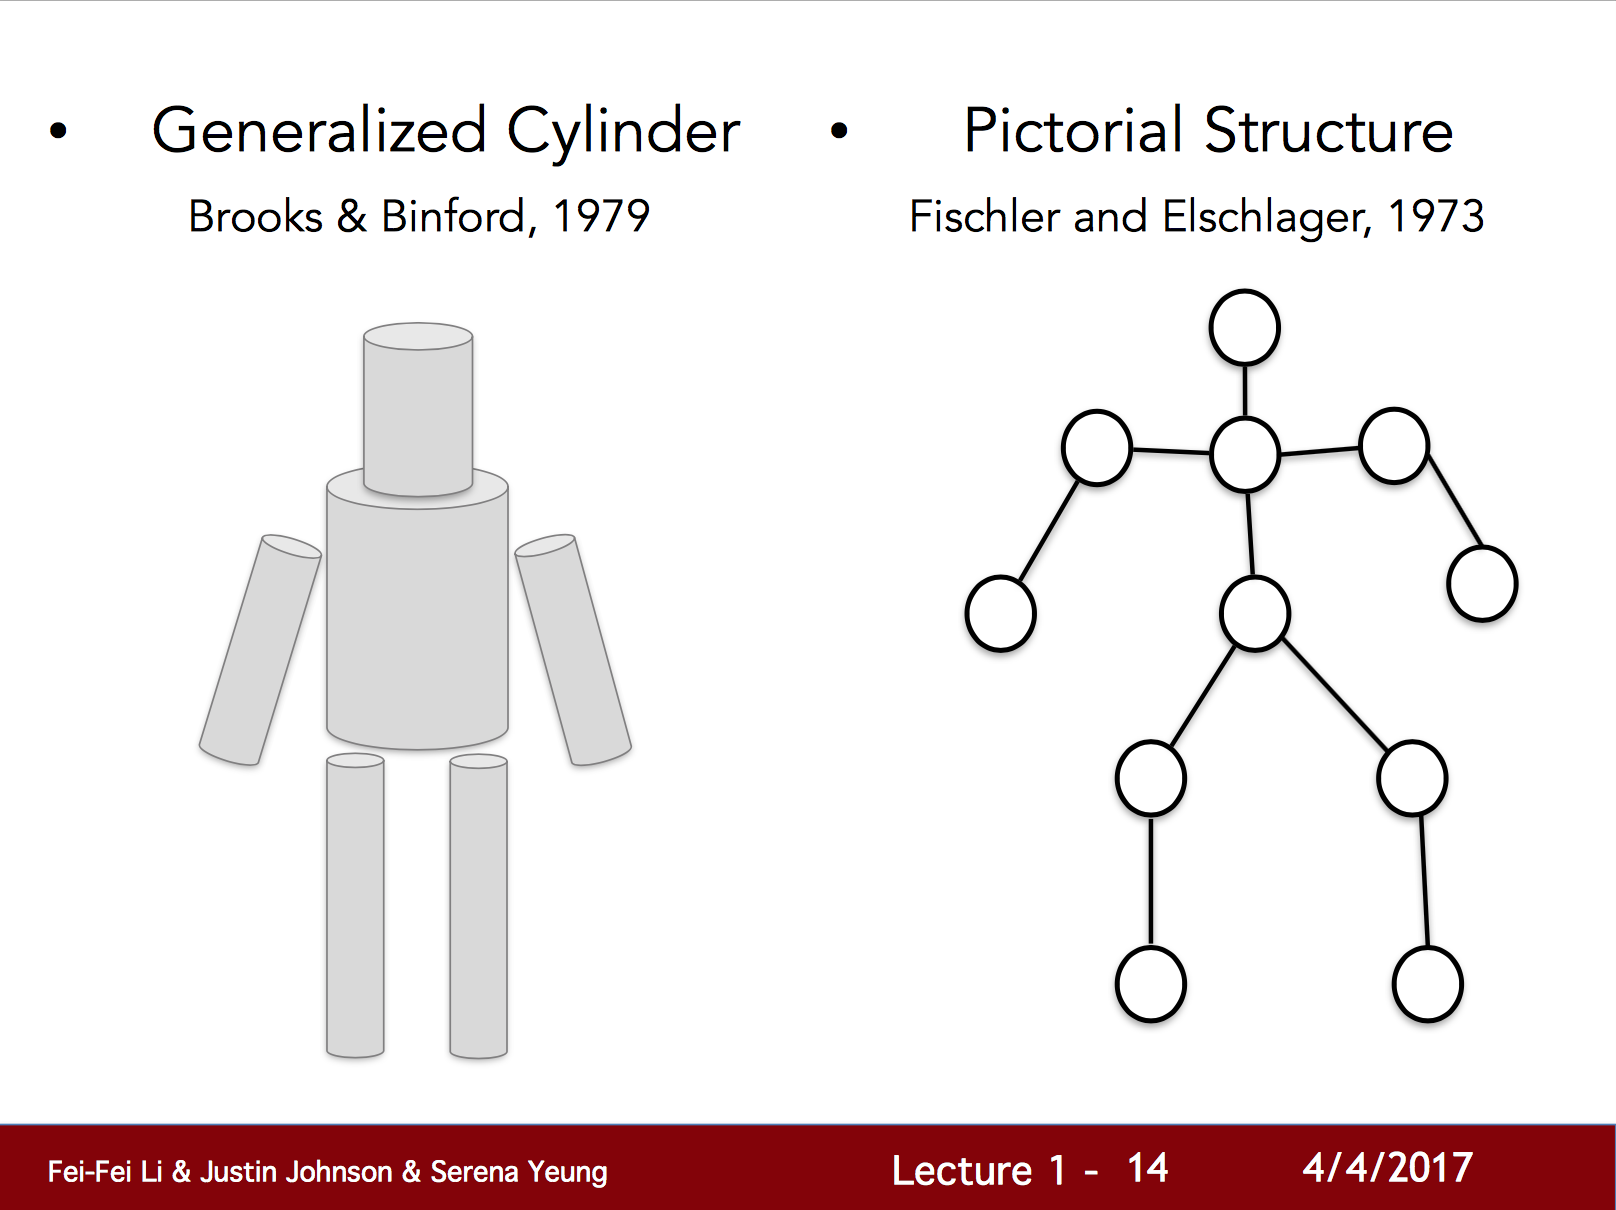 Generalized Cylinder and Pictorial Structure